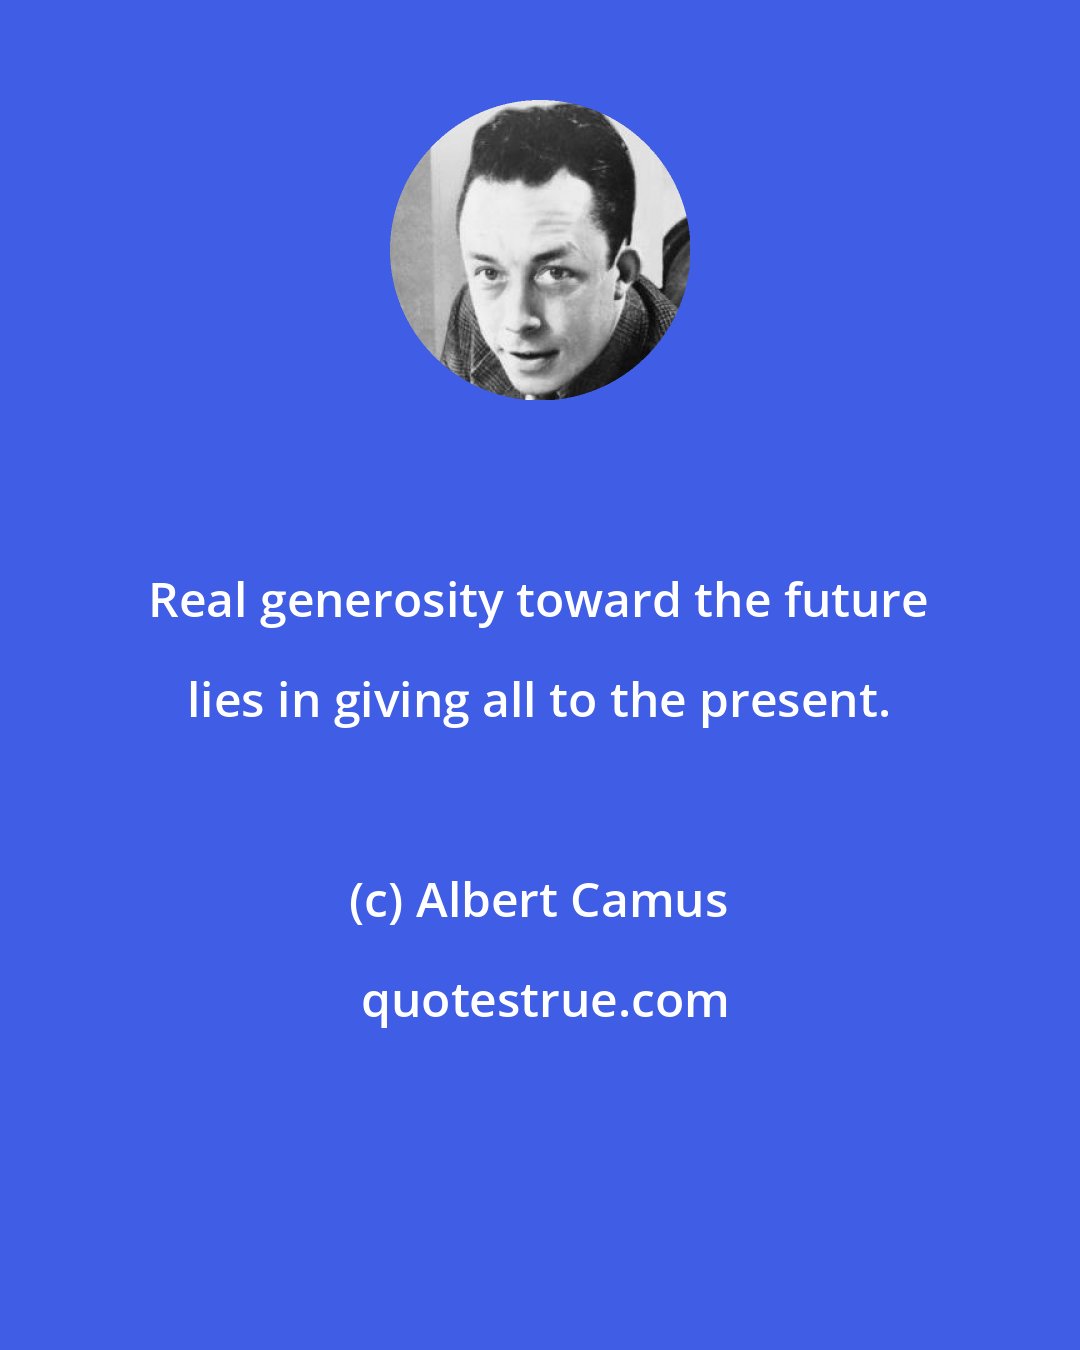 Albert Camus: Real generosity toward the future lies in giving all to the present.